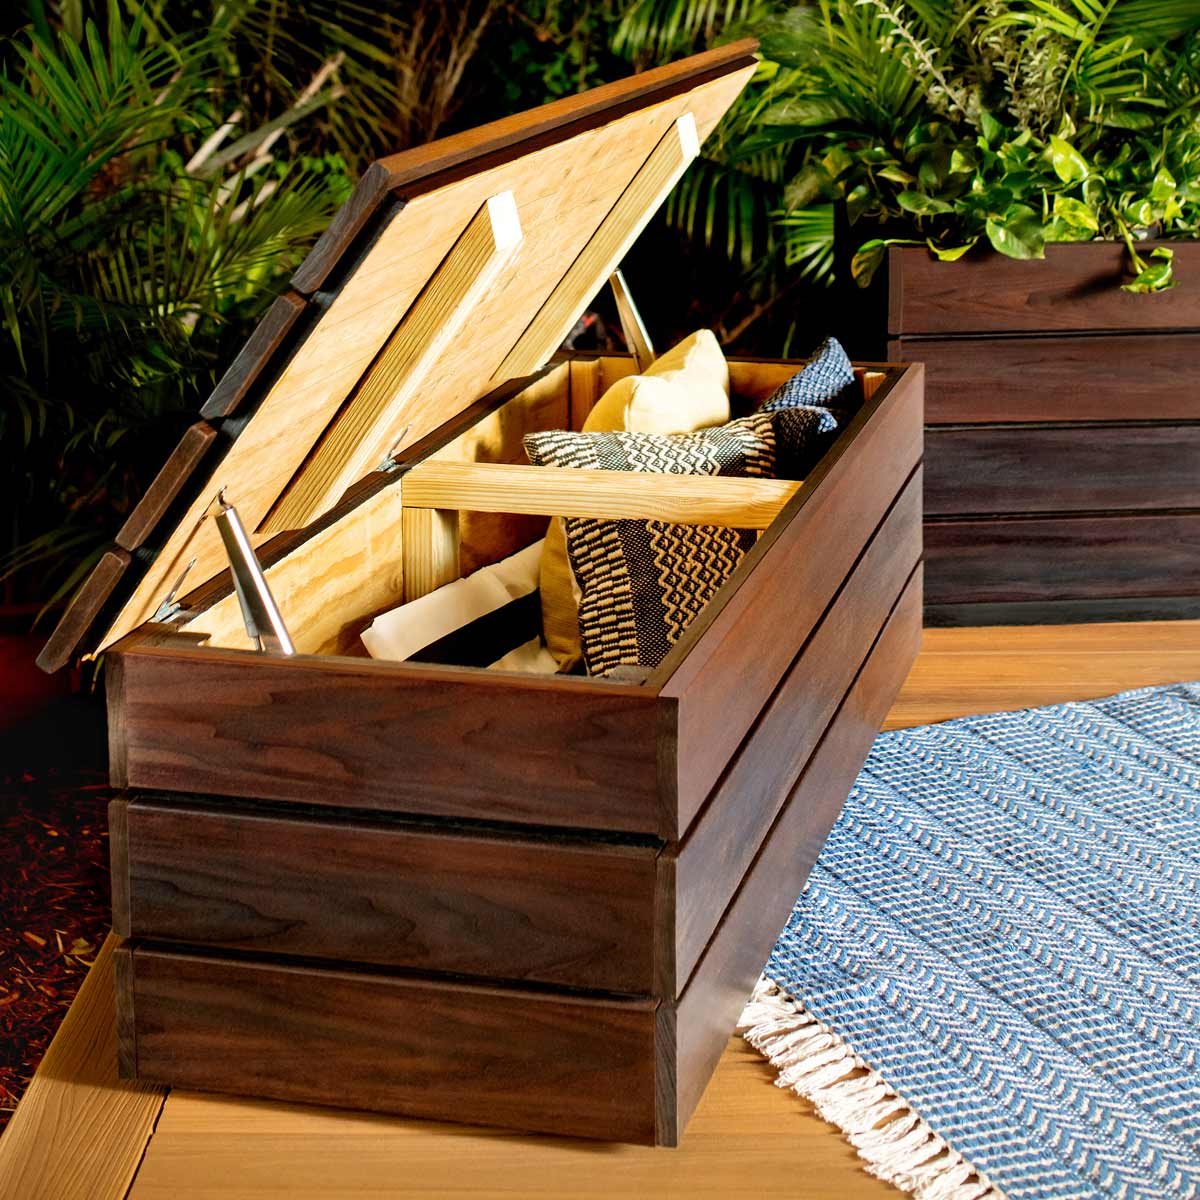 To Build An Outdoor Storage Bench Diy, Diy Outdoor Chair With Storage